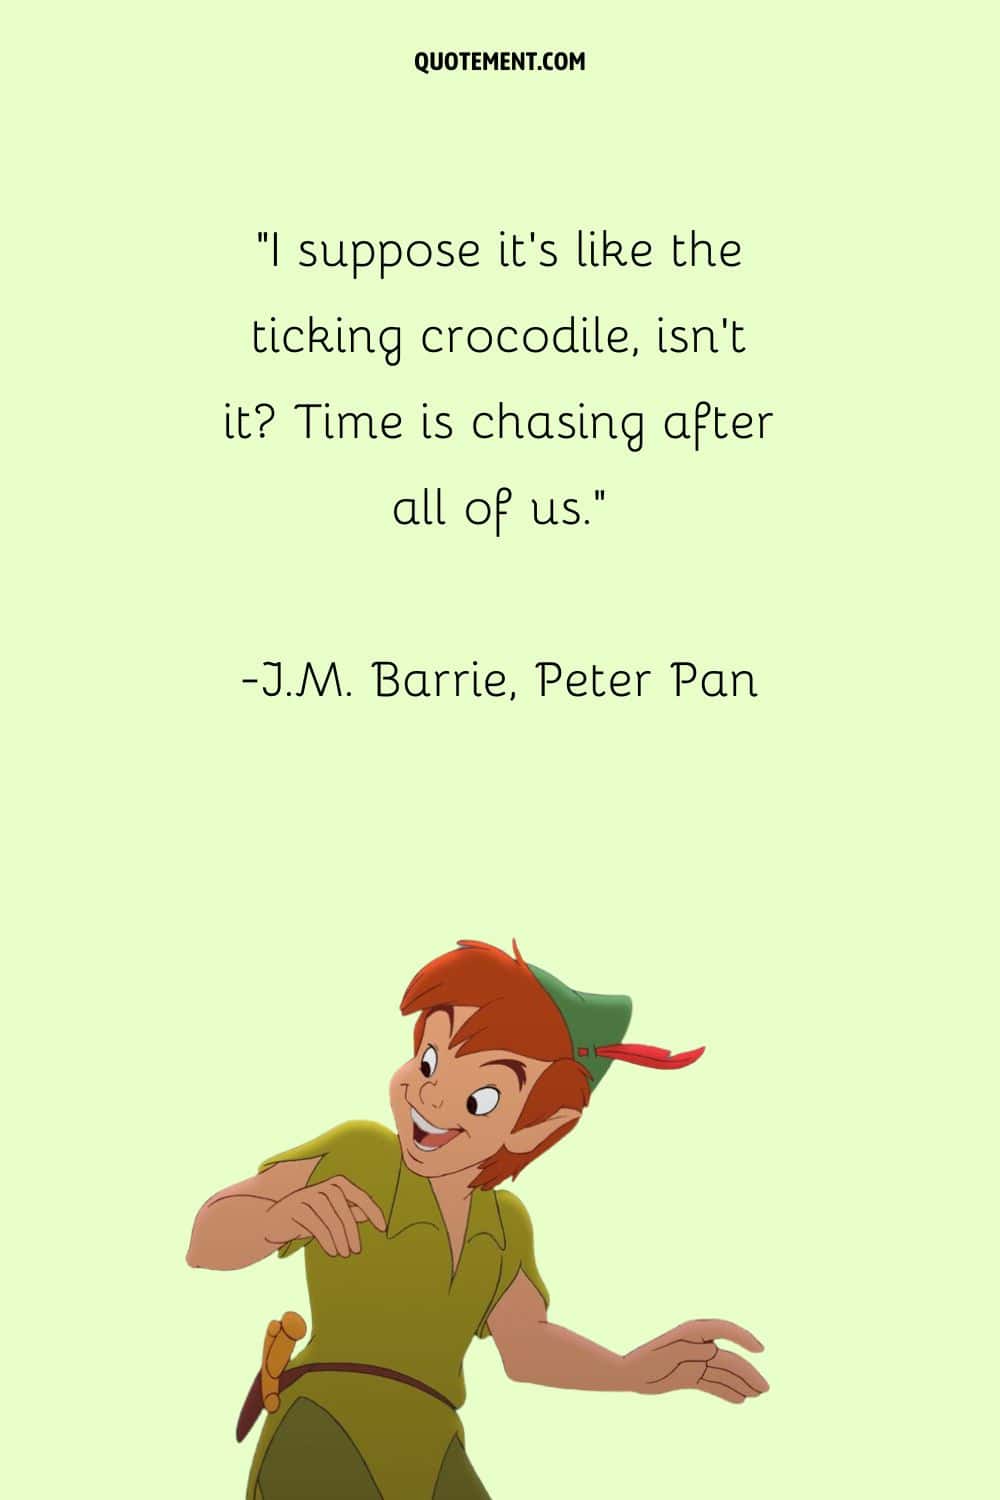 “I suppose it's like the ticking crocodile, isn't it Time is chasing after all of us.” ― J.M. Barrie, Peter Pan